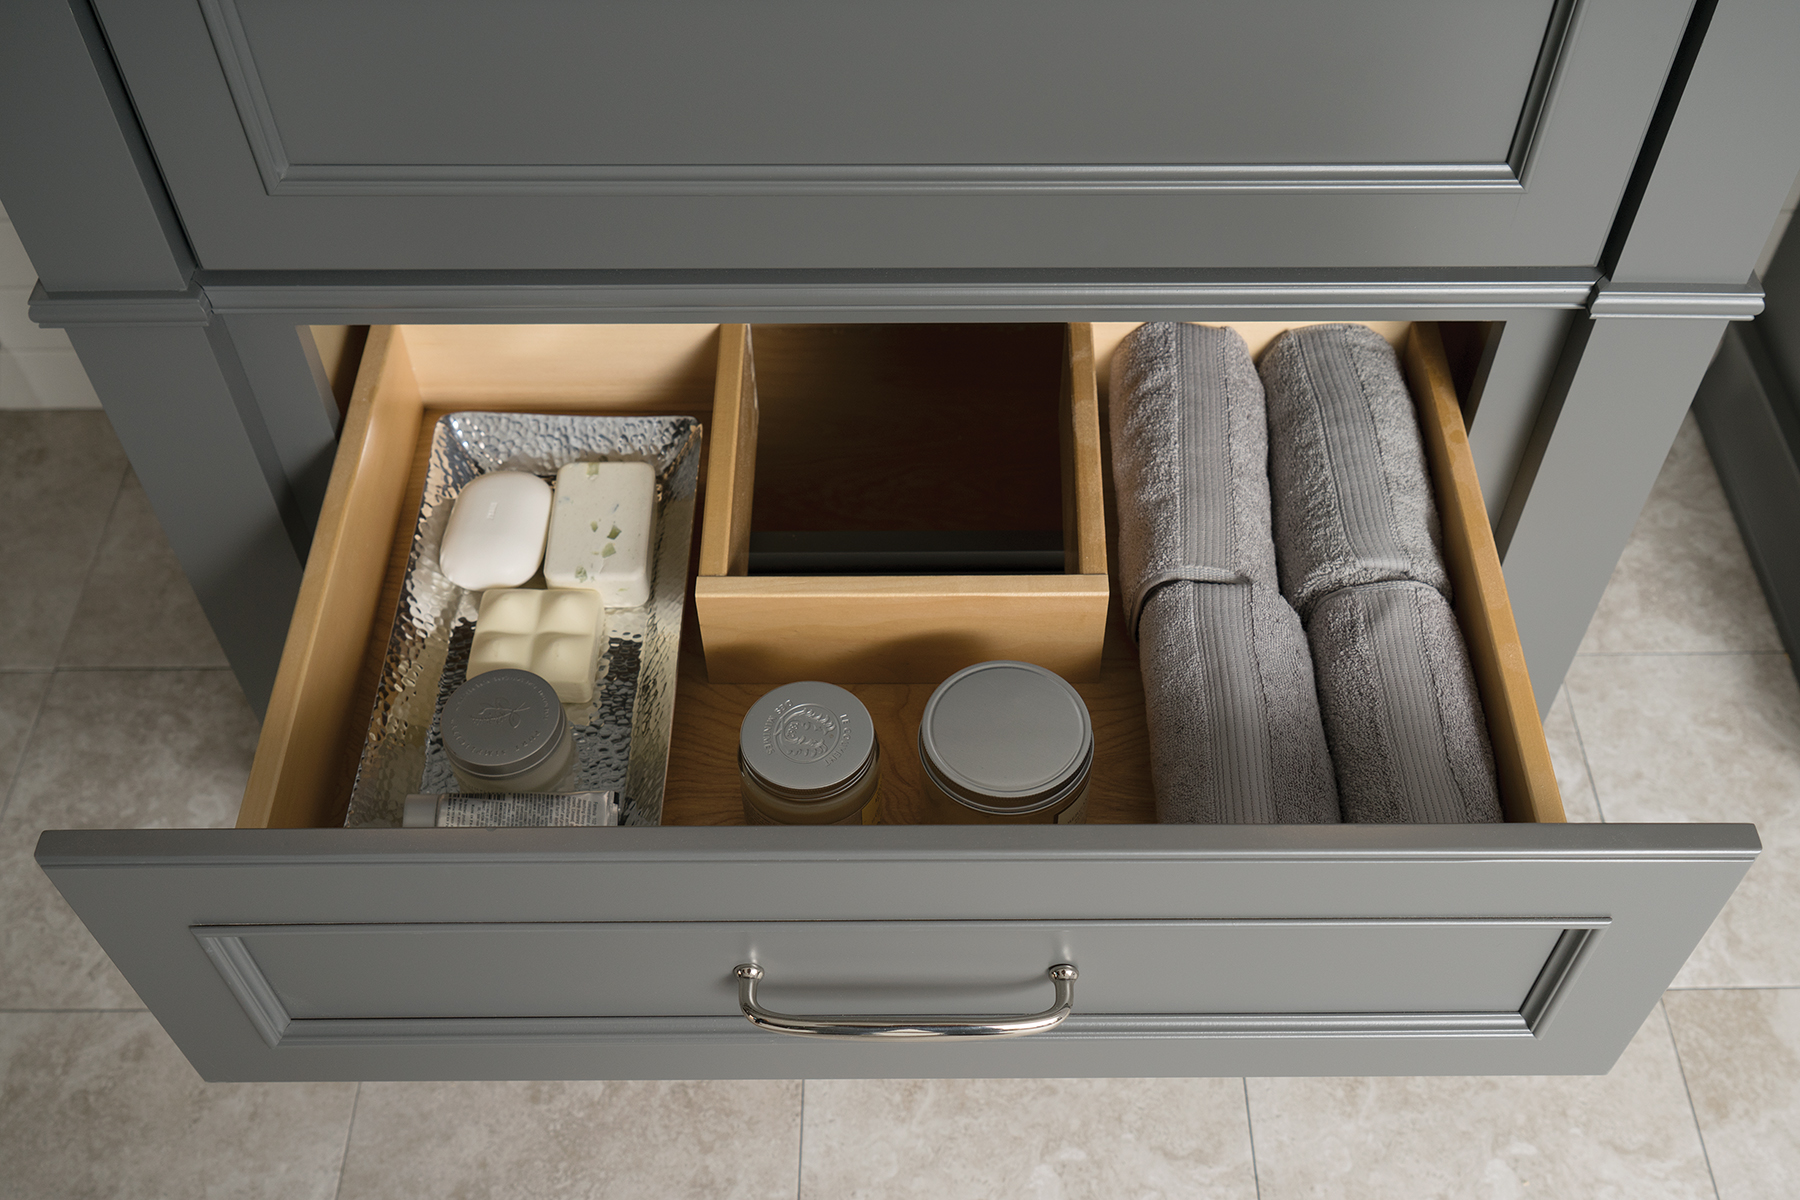 A Plumbing Drawer in a vanity cabinet. The drawer shape wraps around the plumbing fixtures under the sink.